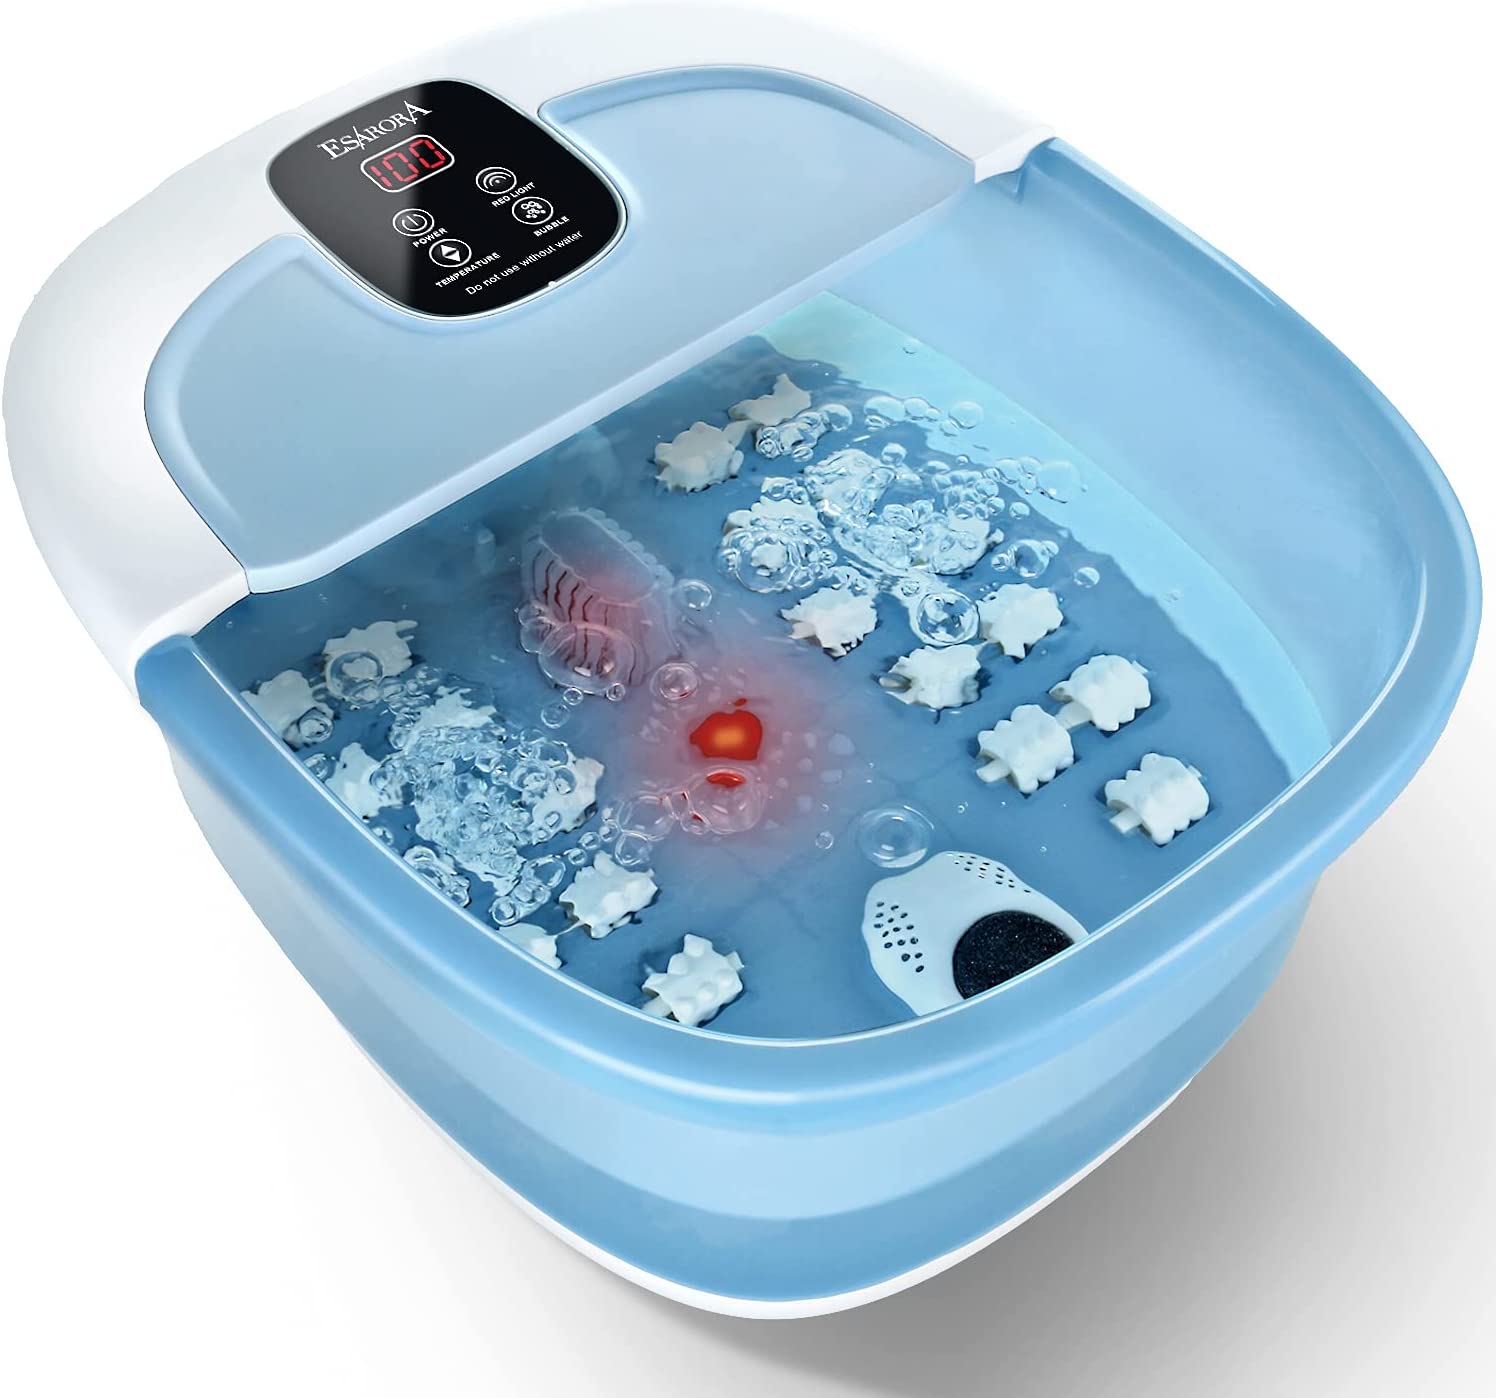 Foot Spa Massager price